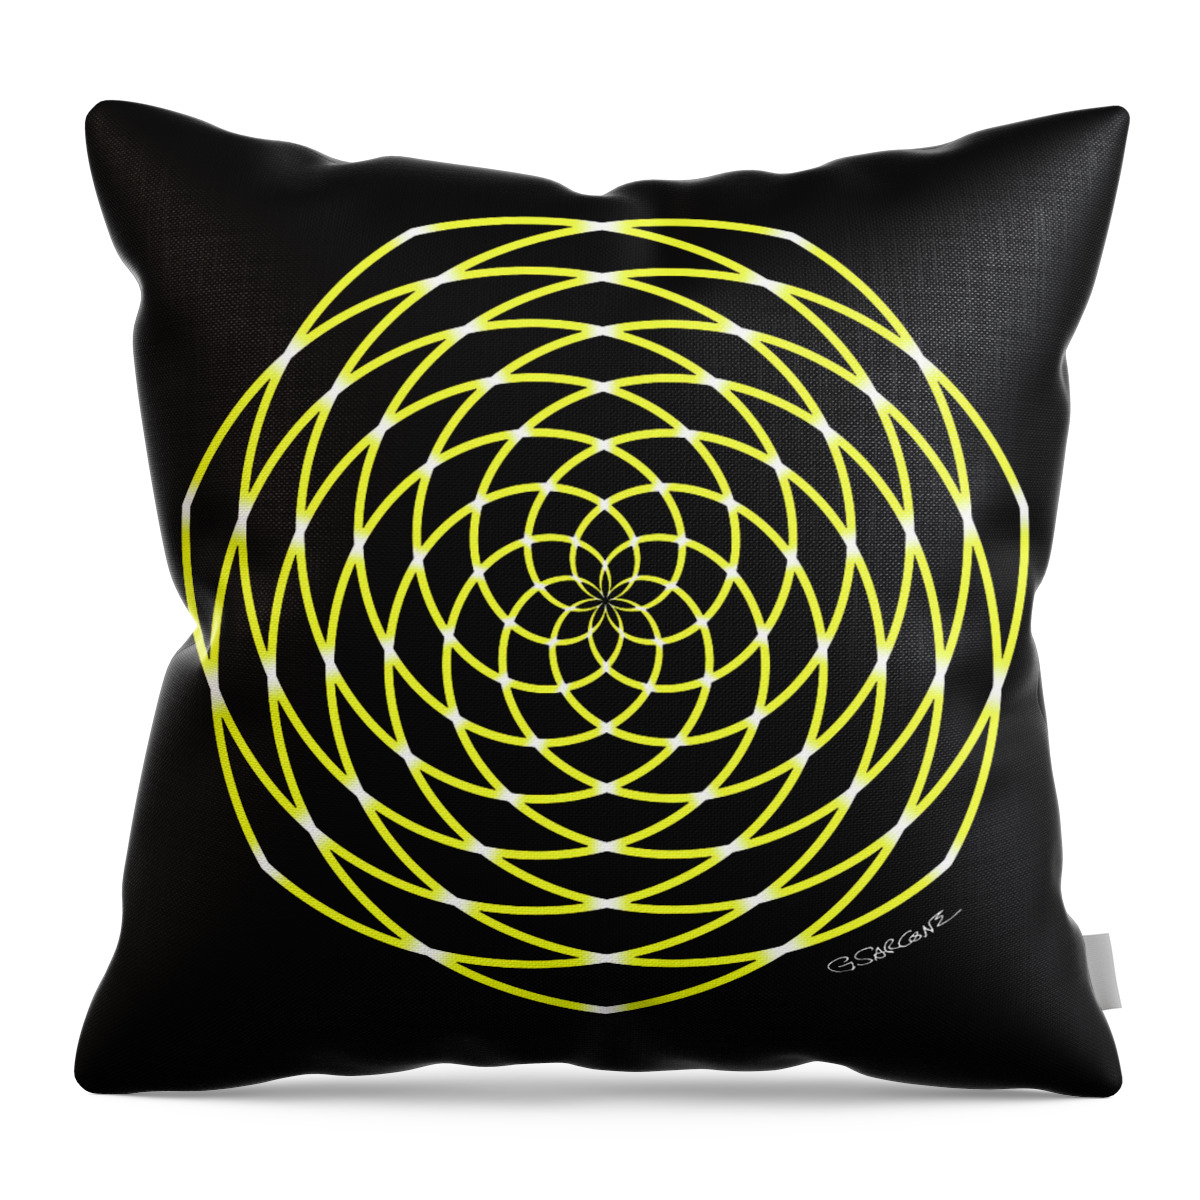 Op Art Throw Pillow featuring the mixed media Starburst 3 by Gianni Sarcone